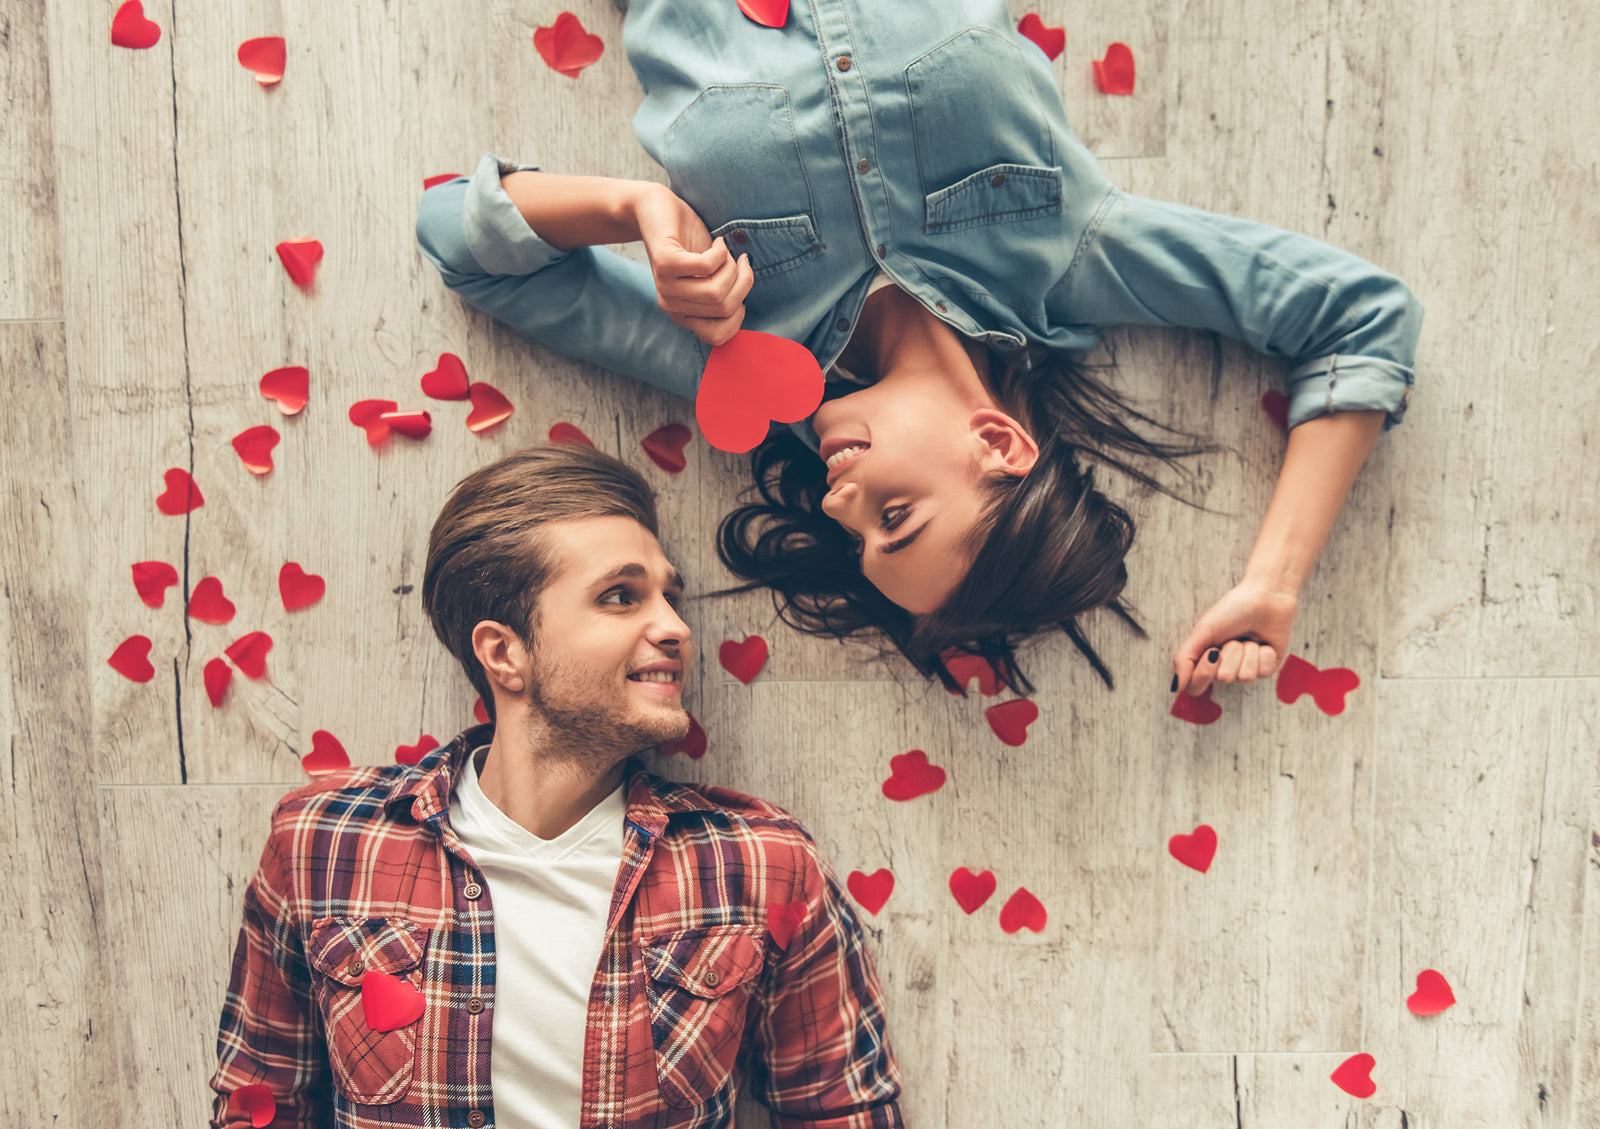 Personalised Valentine's Day Gifts | Personalised Valentine's Day Ideas 2021 | Personalised Valentines Presents Lockdown | WowWee.ie